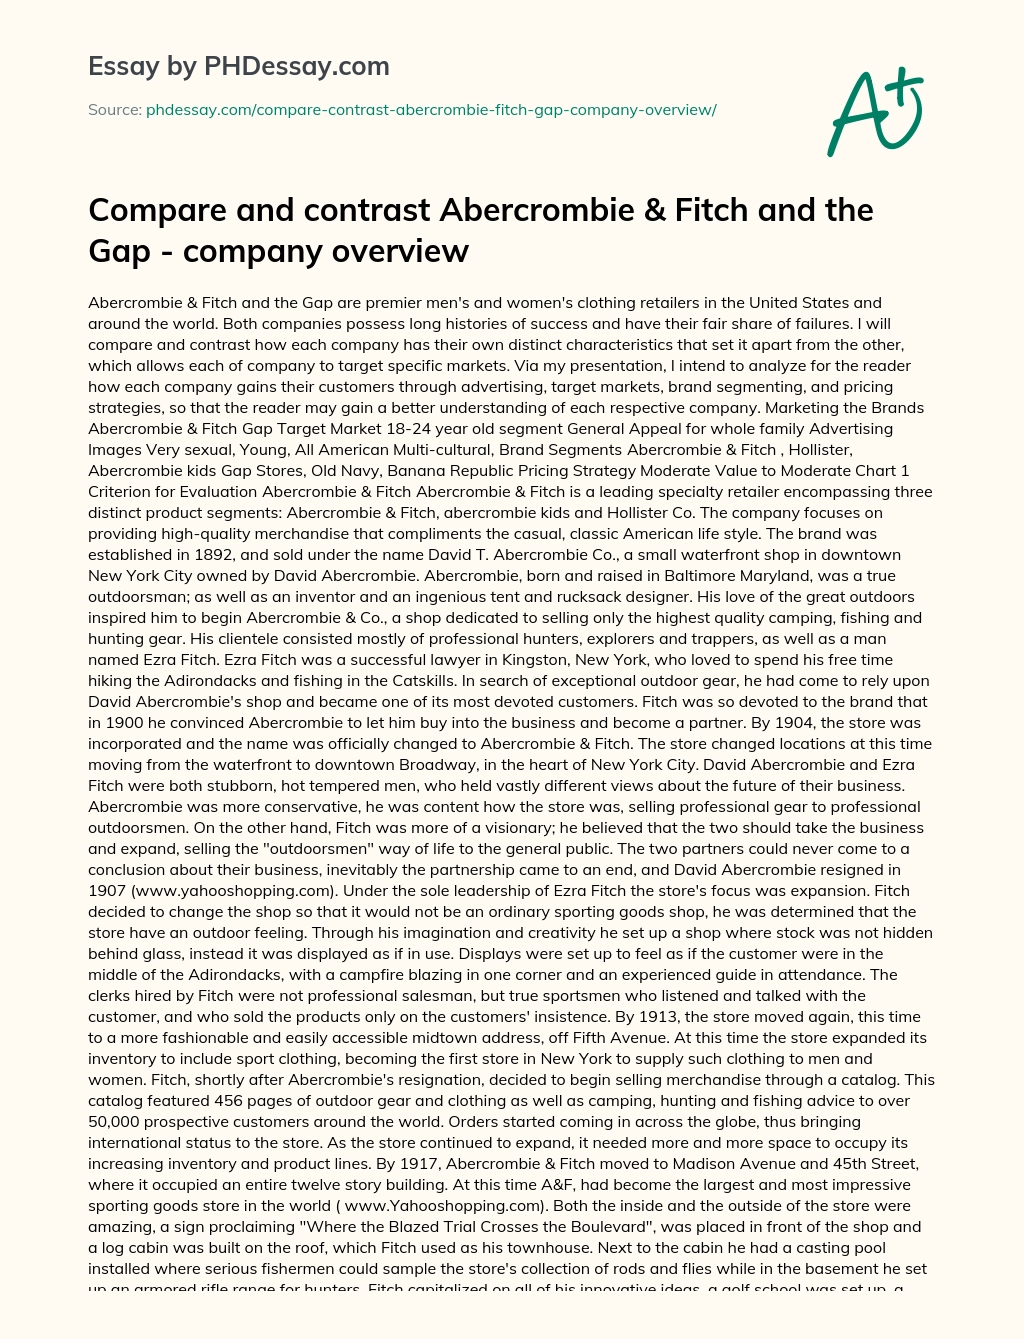 Compare and Contrast Abercrombie & Fitch and the Gap – Company Overview essay